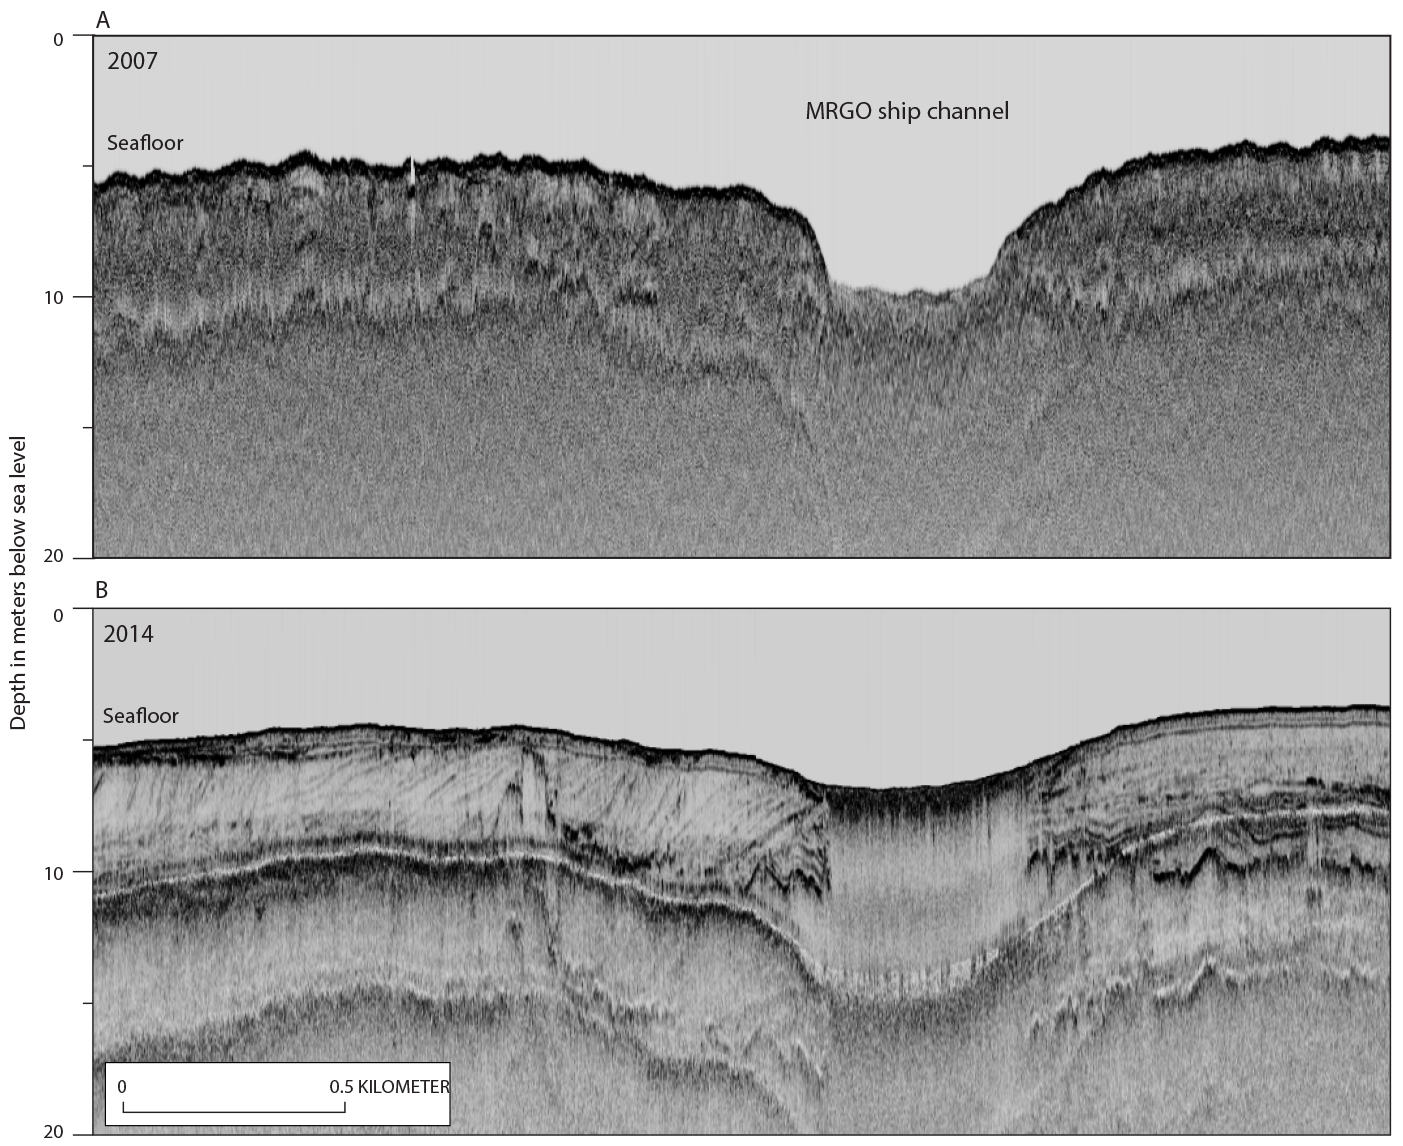 Figure 20. ”Depth in meters below sea level” is labeled on the y-axes, and the seafloor
                        is labeled in the images.